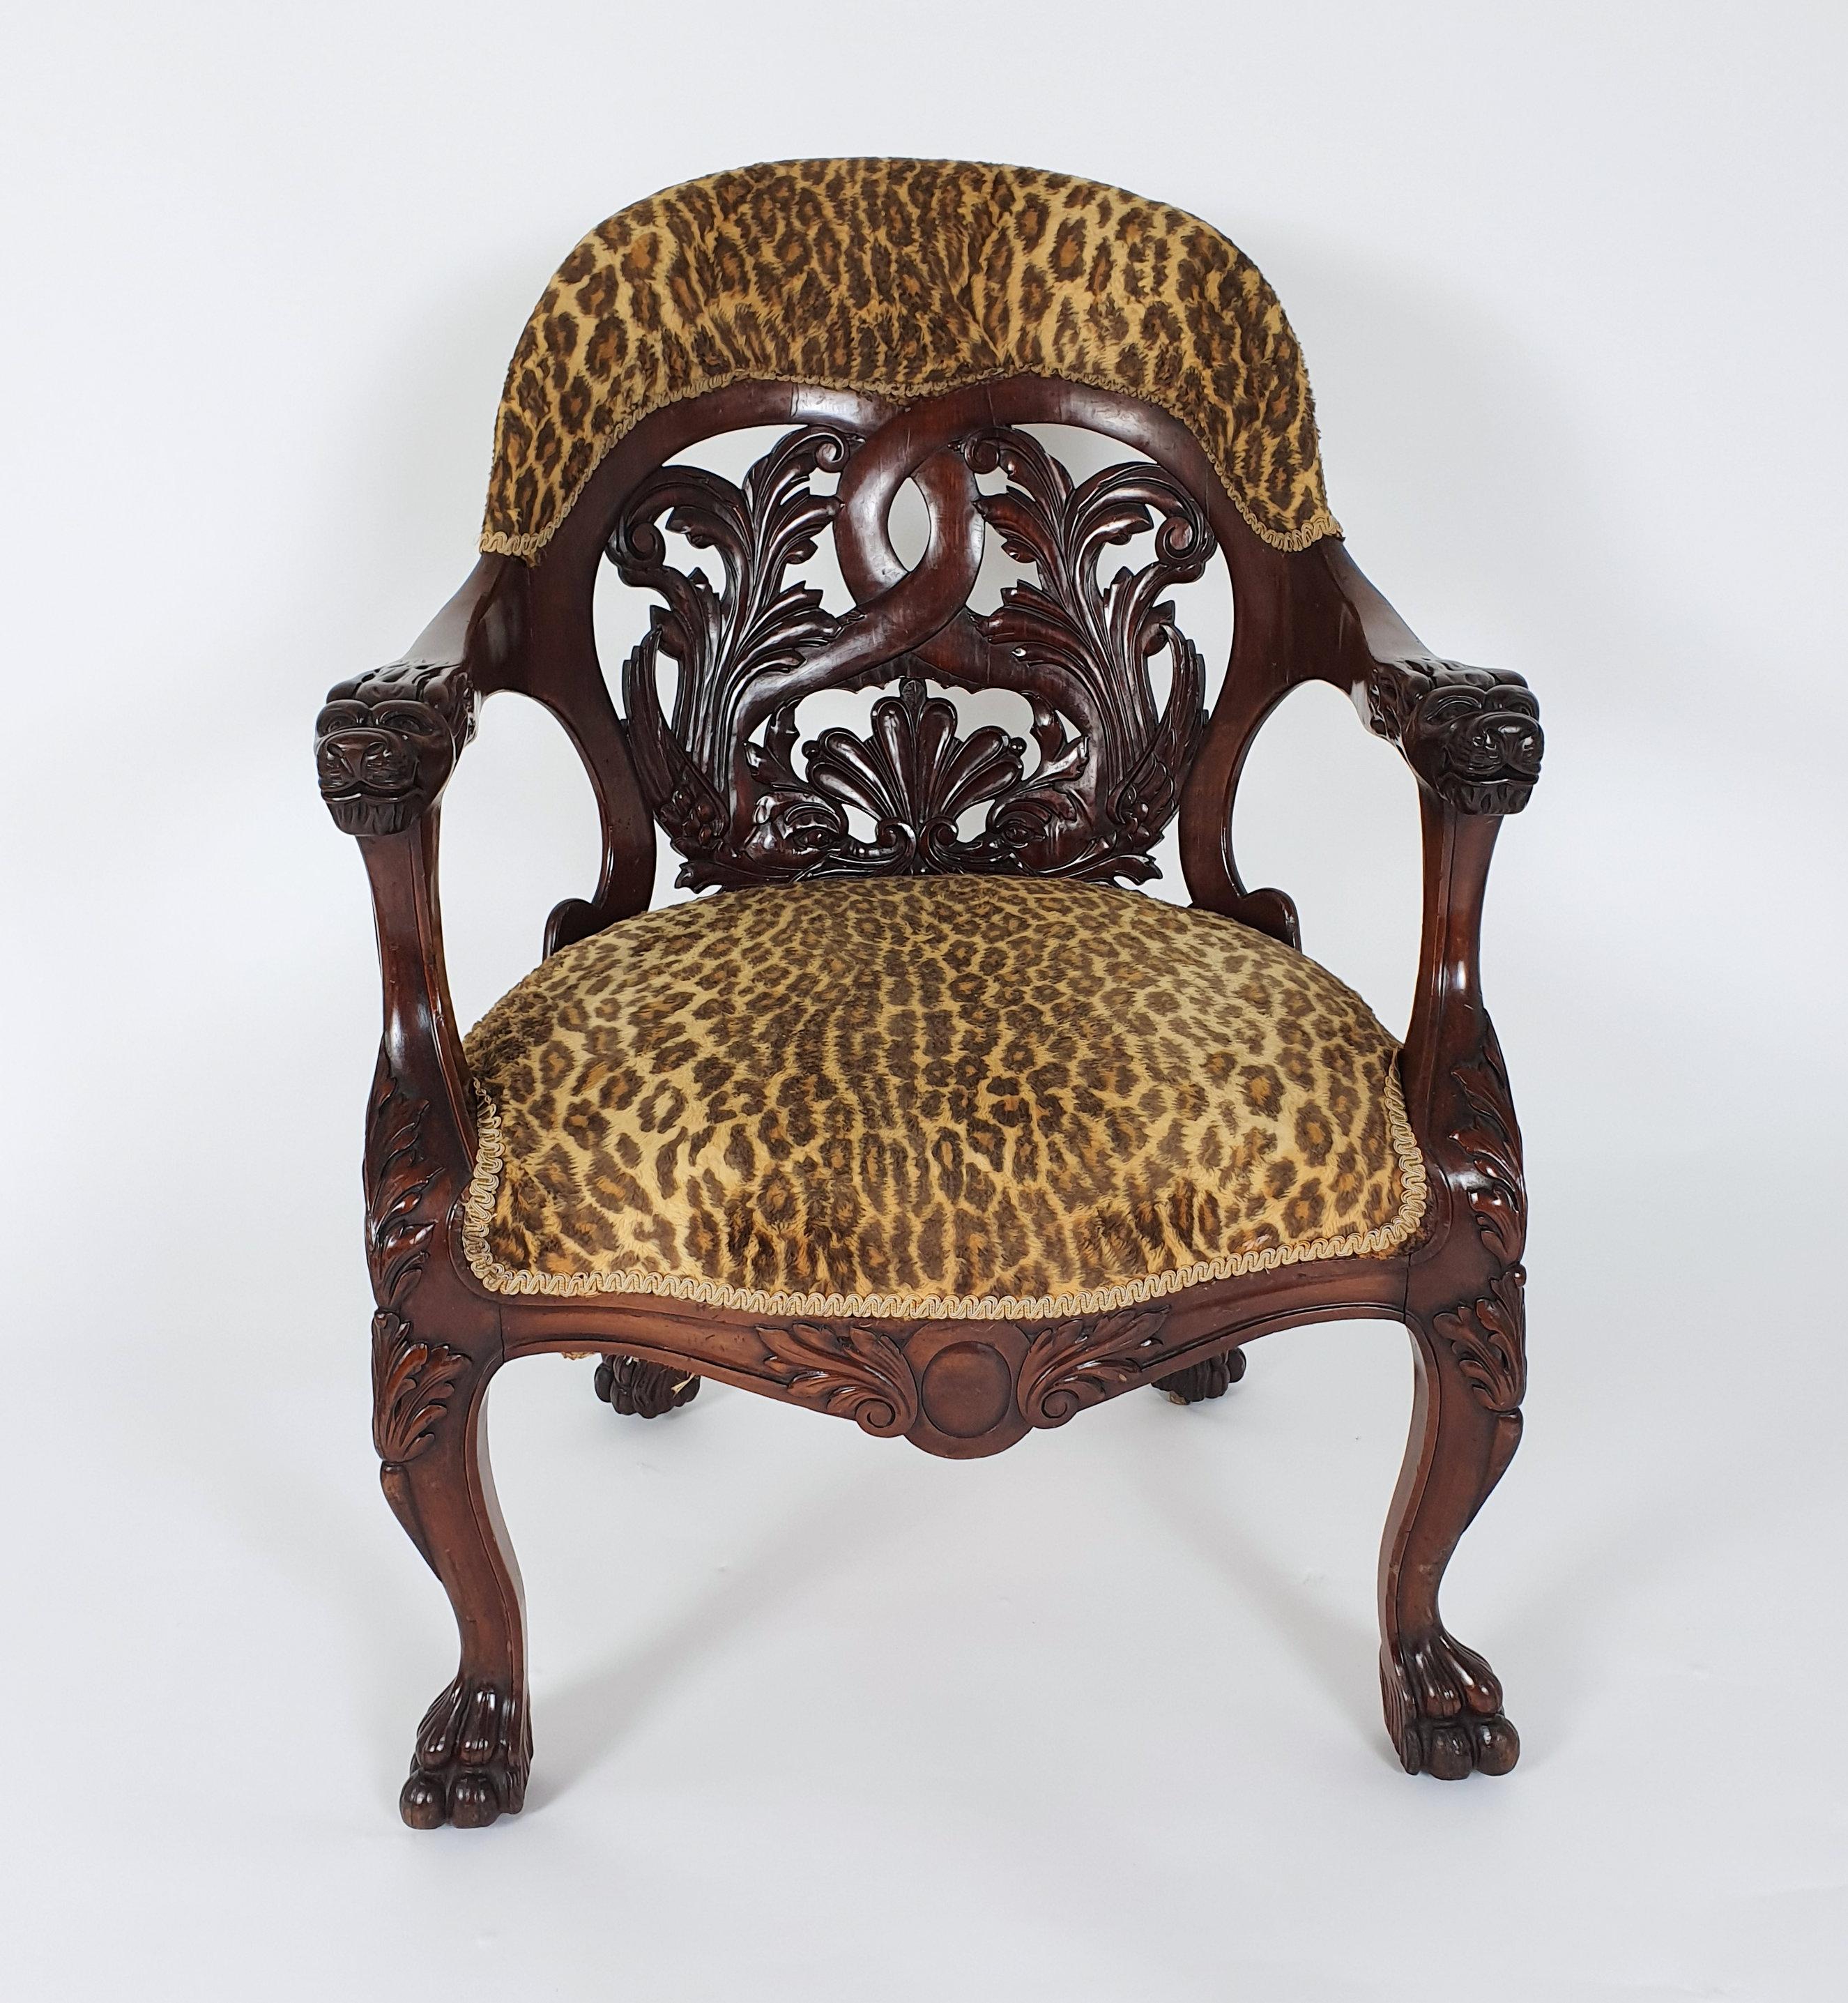 A mid-19th century French carved walnut desk chair with a horseshoe shaped back decorated with stylised dolphins. This gorgeous chair stands on carved paw feet with the original castors. It measures 26 ½ in – 67.3 cm wide, 23 ½ in – 59.7 cm deep and